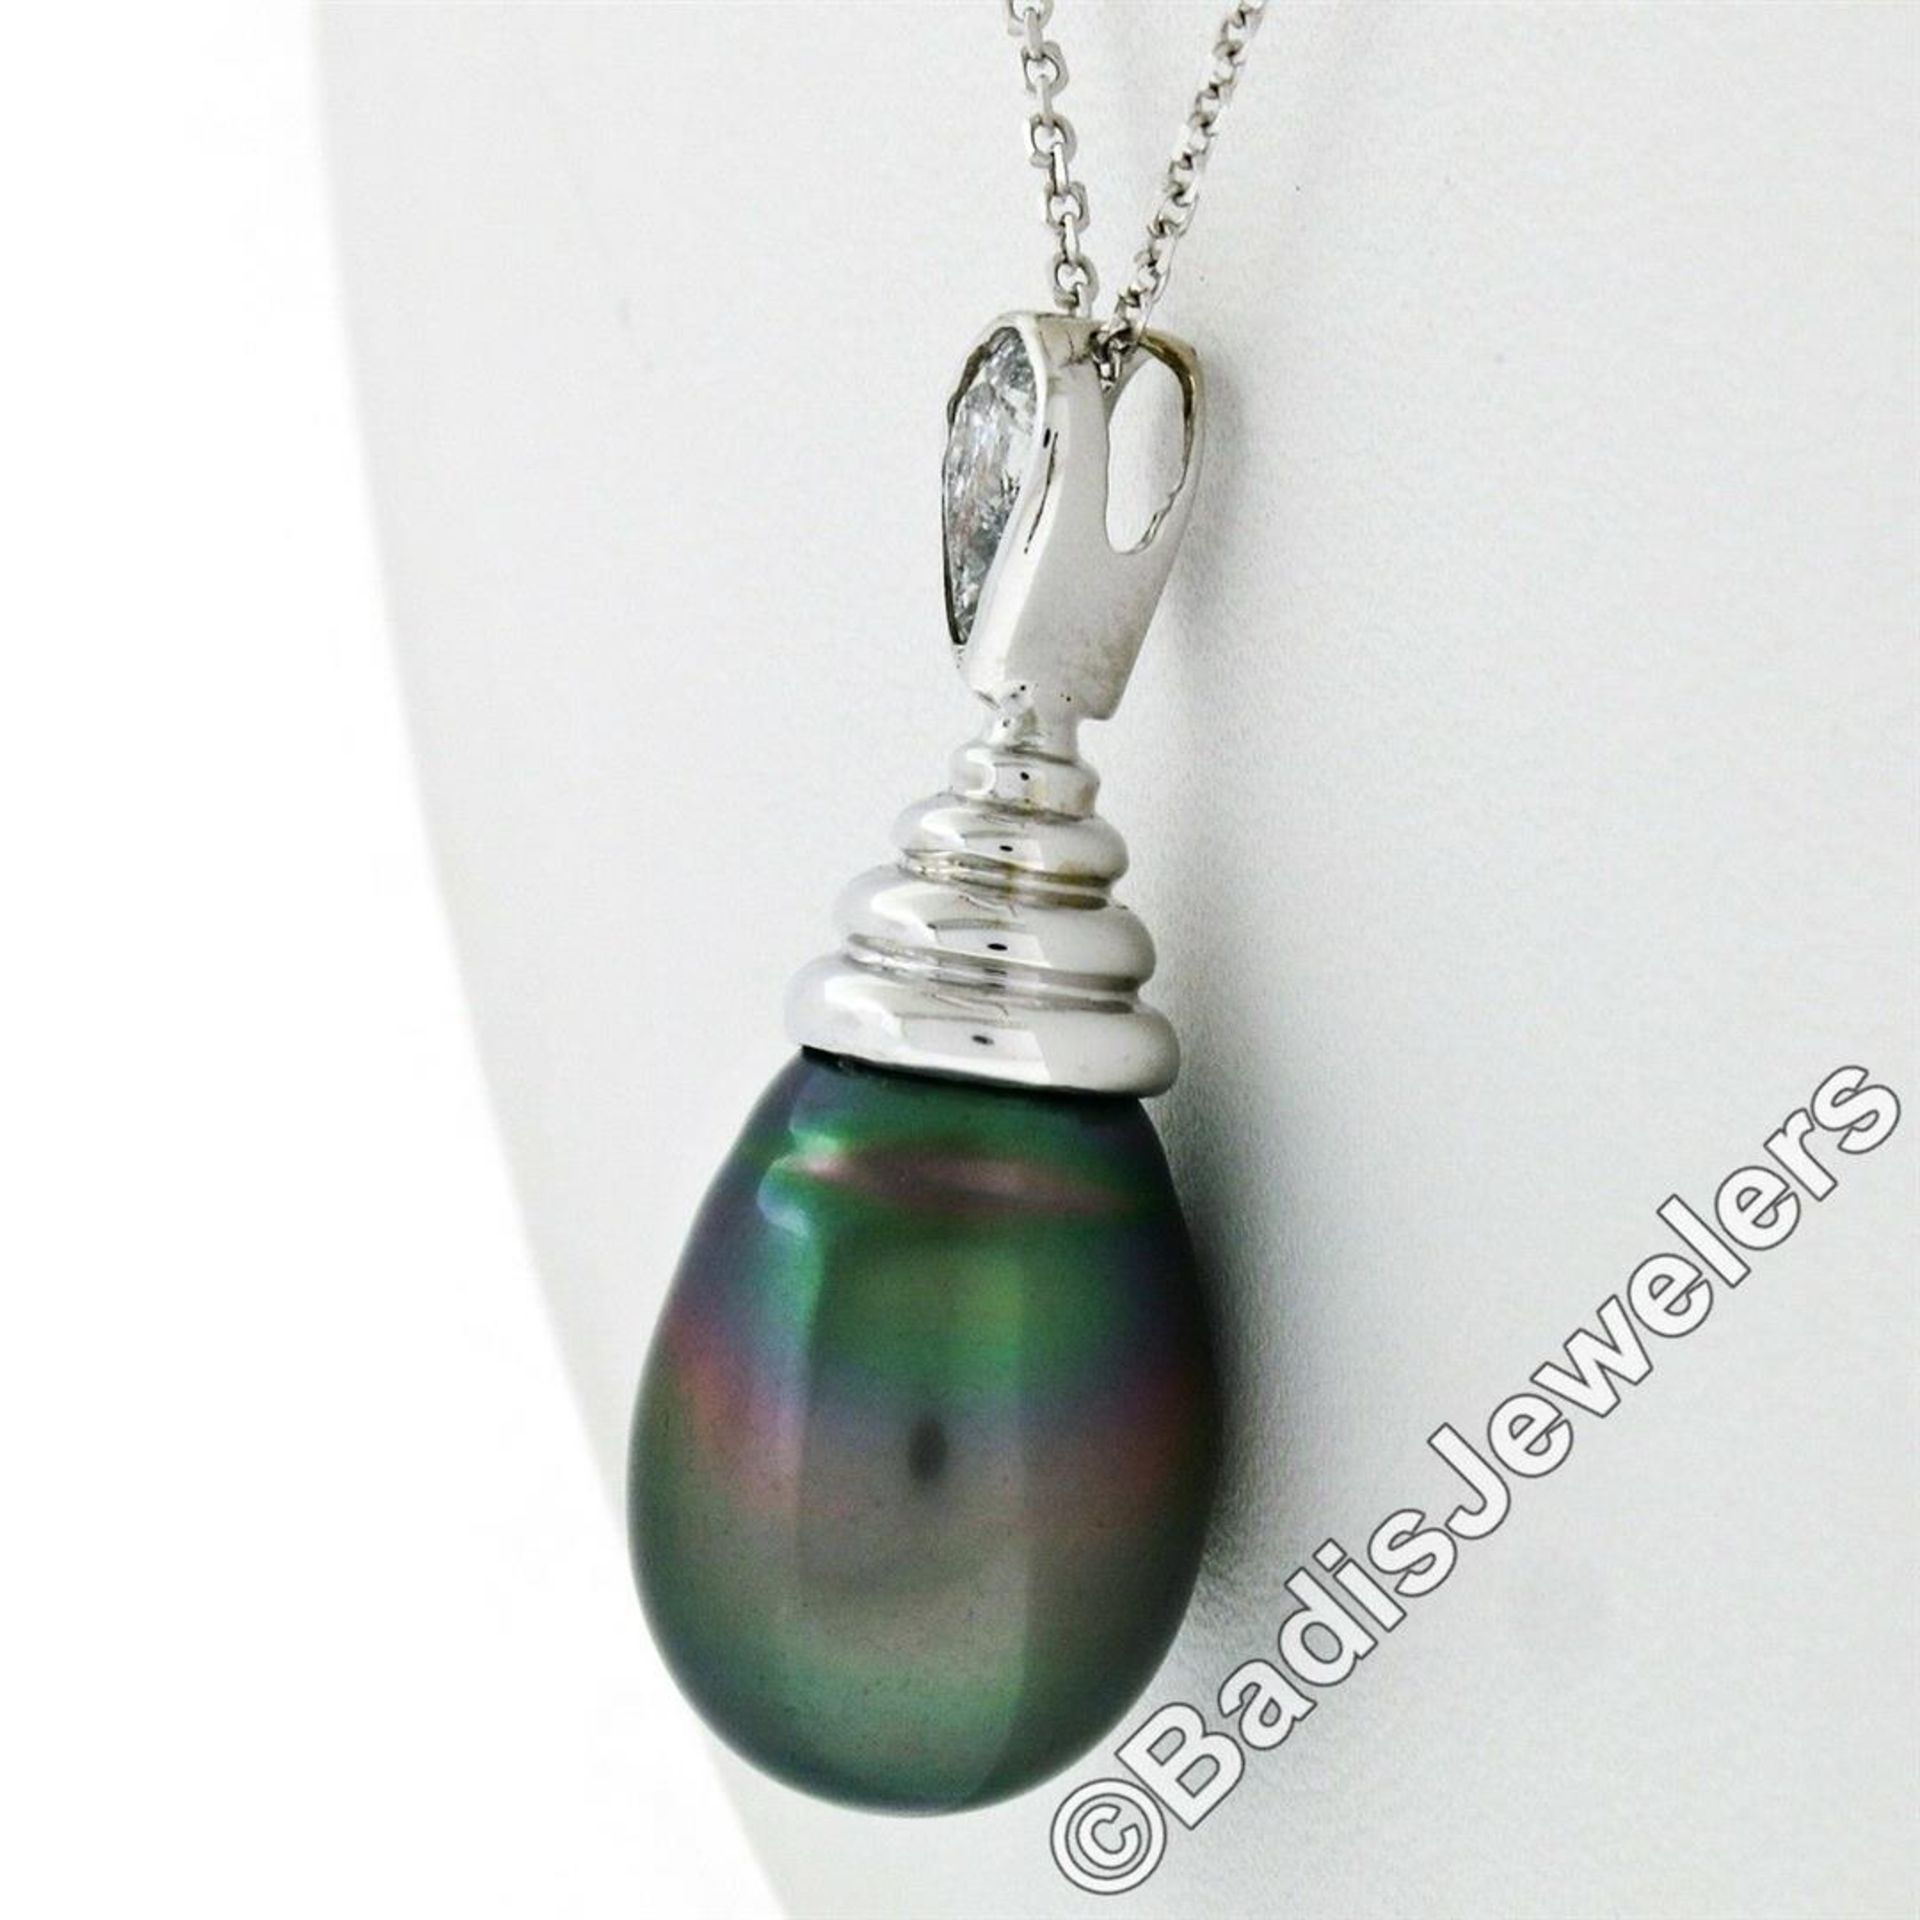 18kt White Gold Tahitian Black Pearl and 0.60 ct Diamond Pendant Necklace - Image 4 of 7